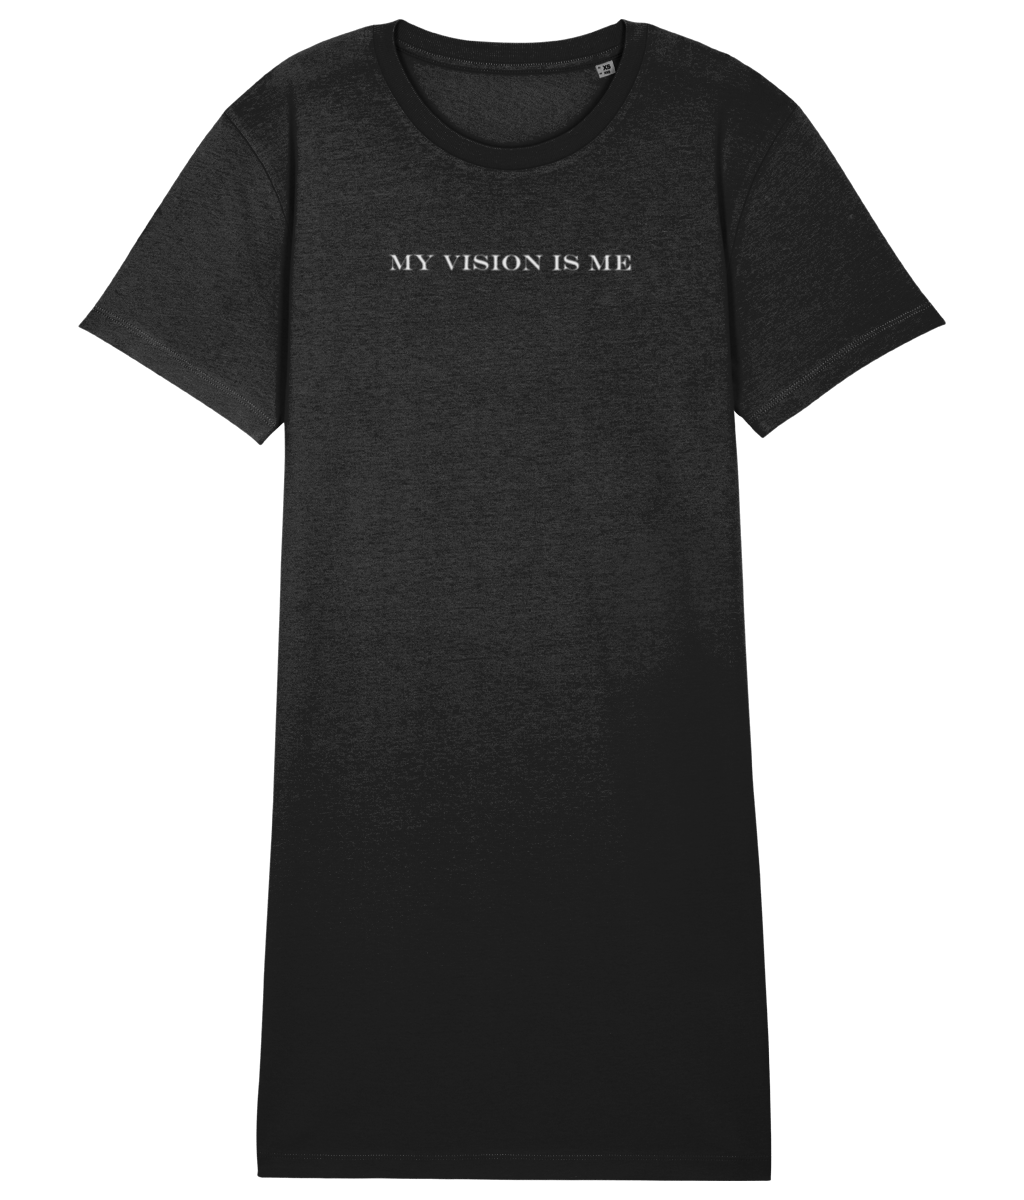 MY VISION IS ME T-SHIRT DRESS